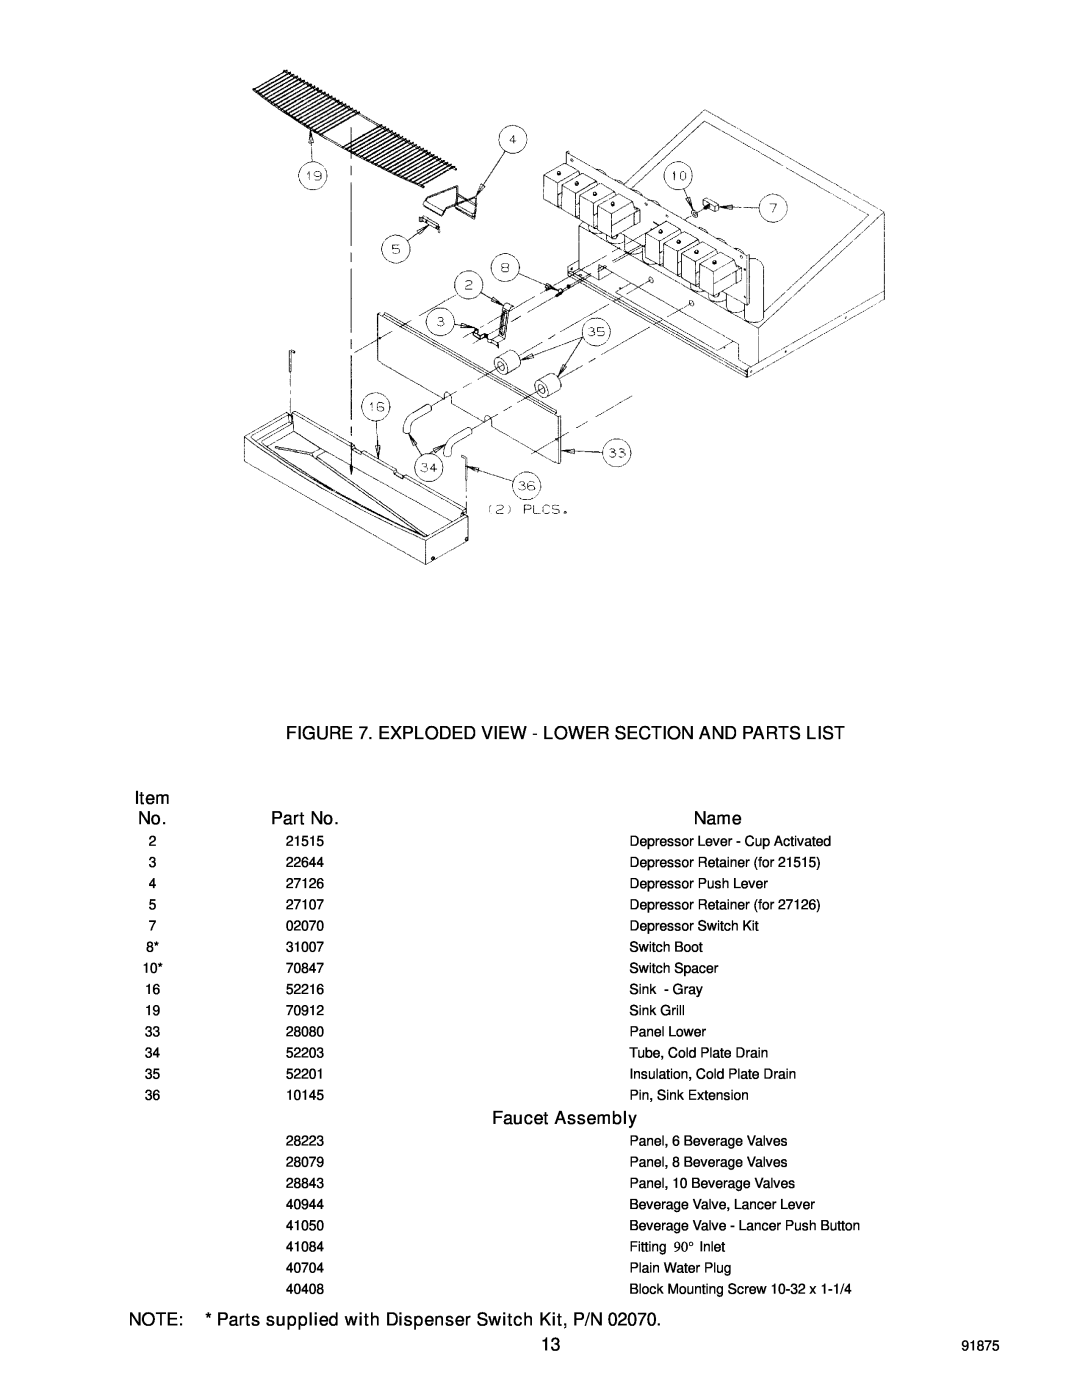 Cornelius D3030 manual Faucet Assembly, Parts supplied with Dispenser Switch Kit, P/N, Name 